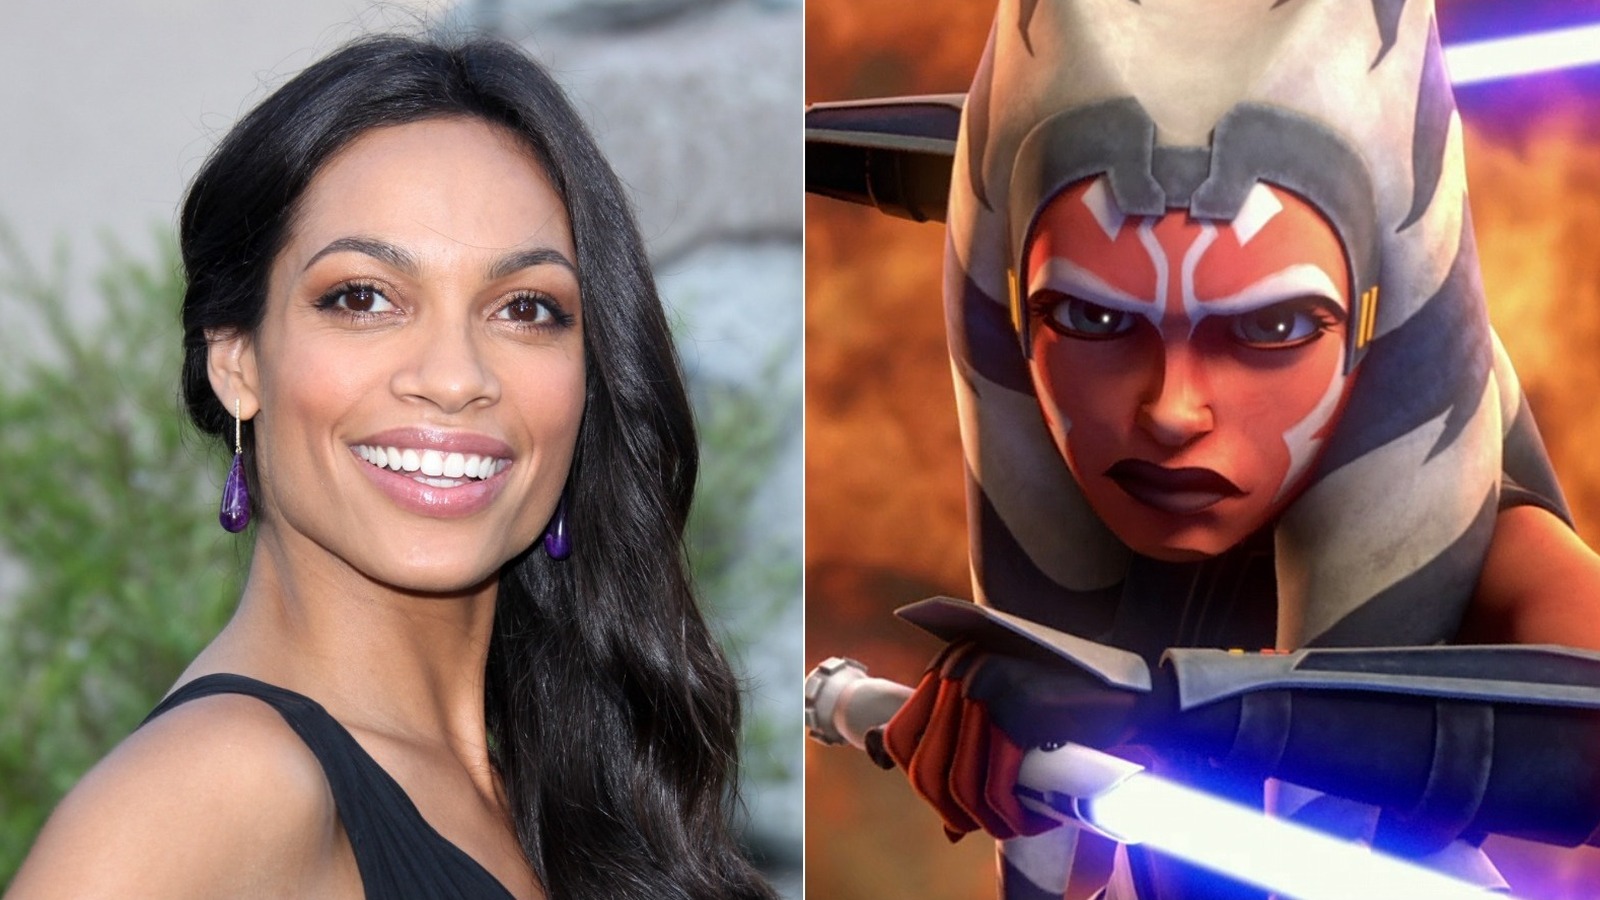 Star Wars: Ahsoka Actress Speaks Out on Her The Rise of Skywalker Appearance